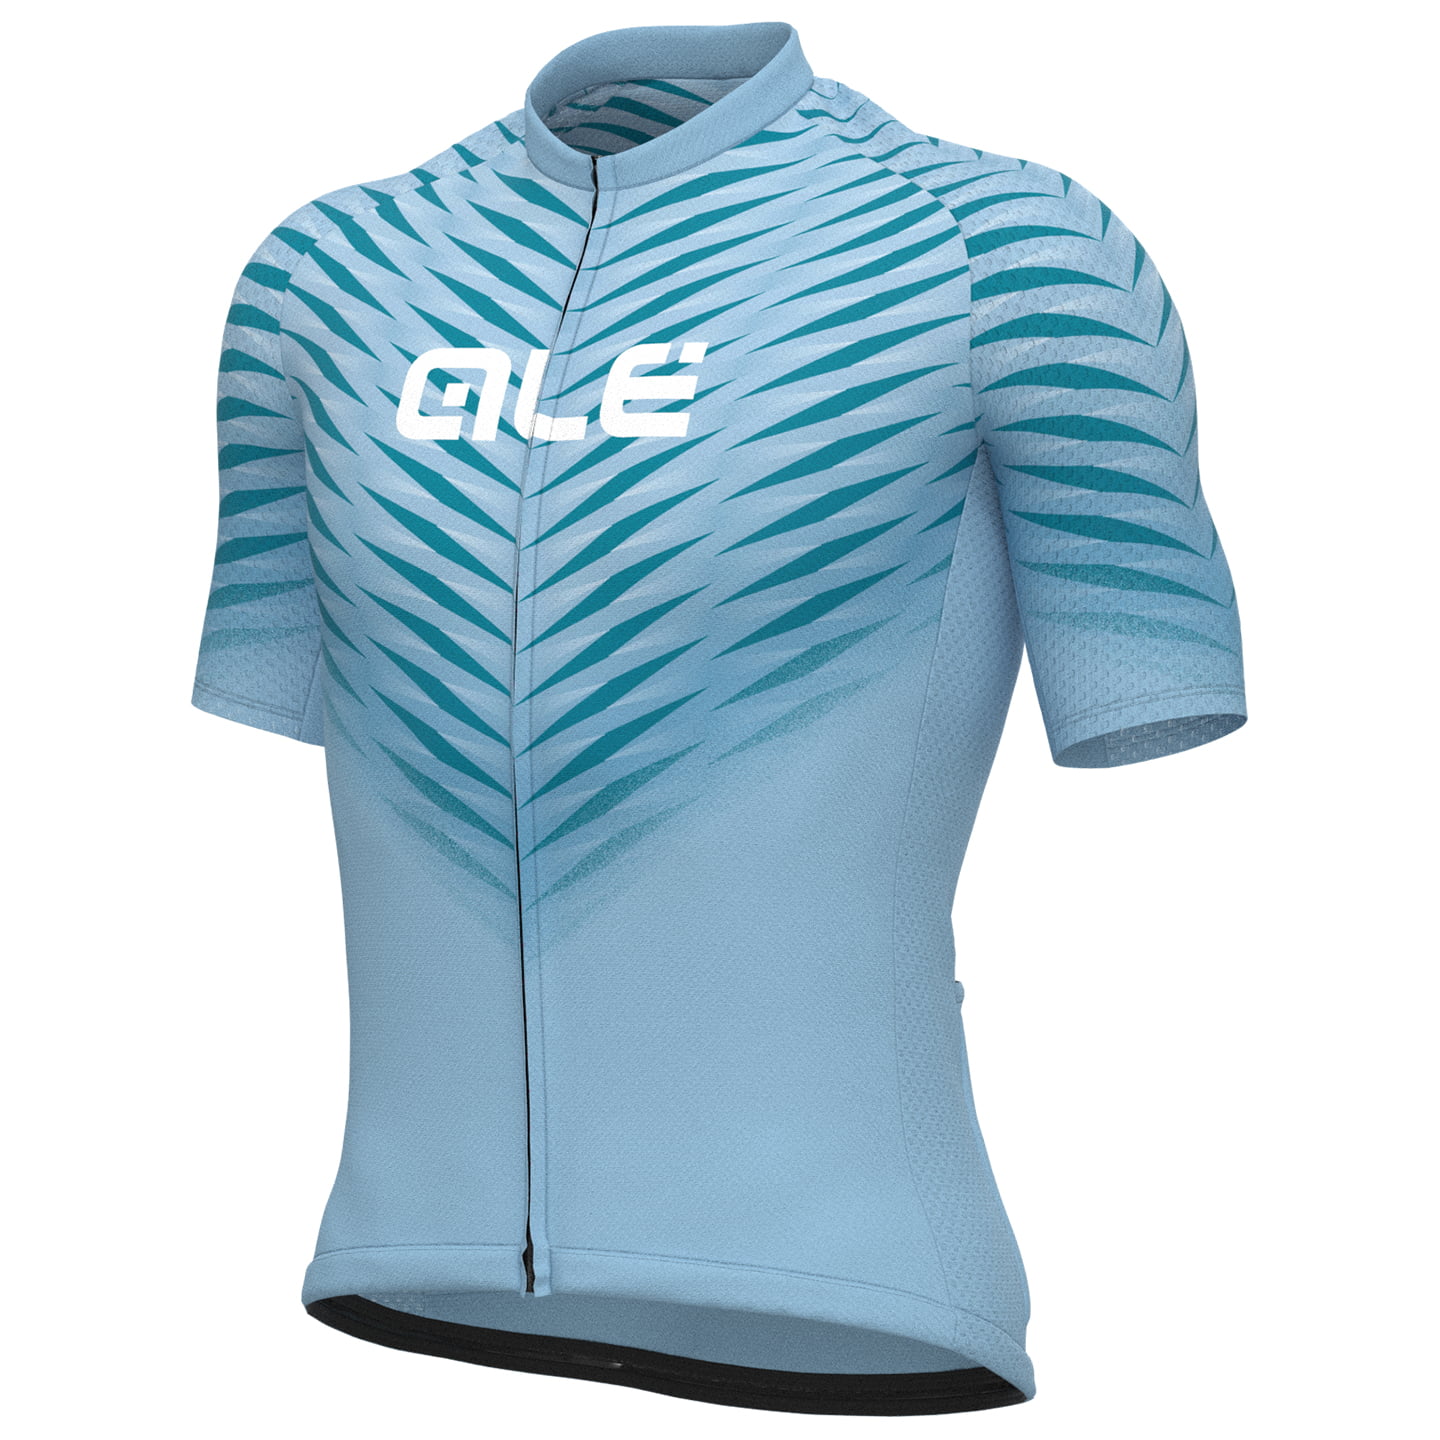 ALE Thorn Short Sleeve Jersey Short Sleeve Jersey, for men, size 2XL, Cycling jersey, Cycle clothing